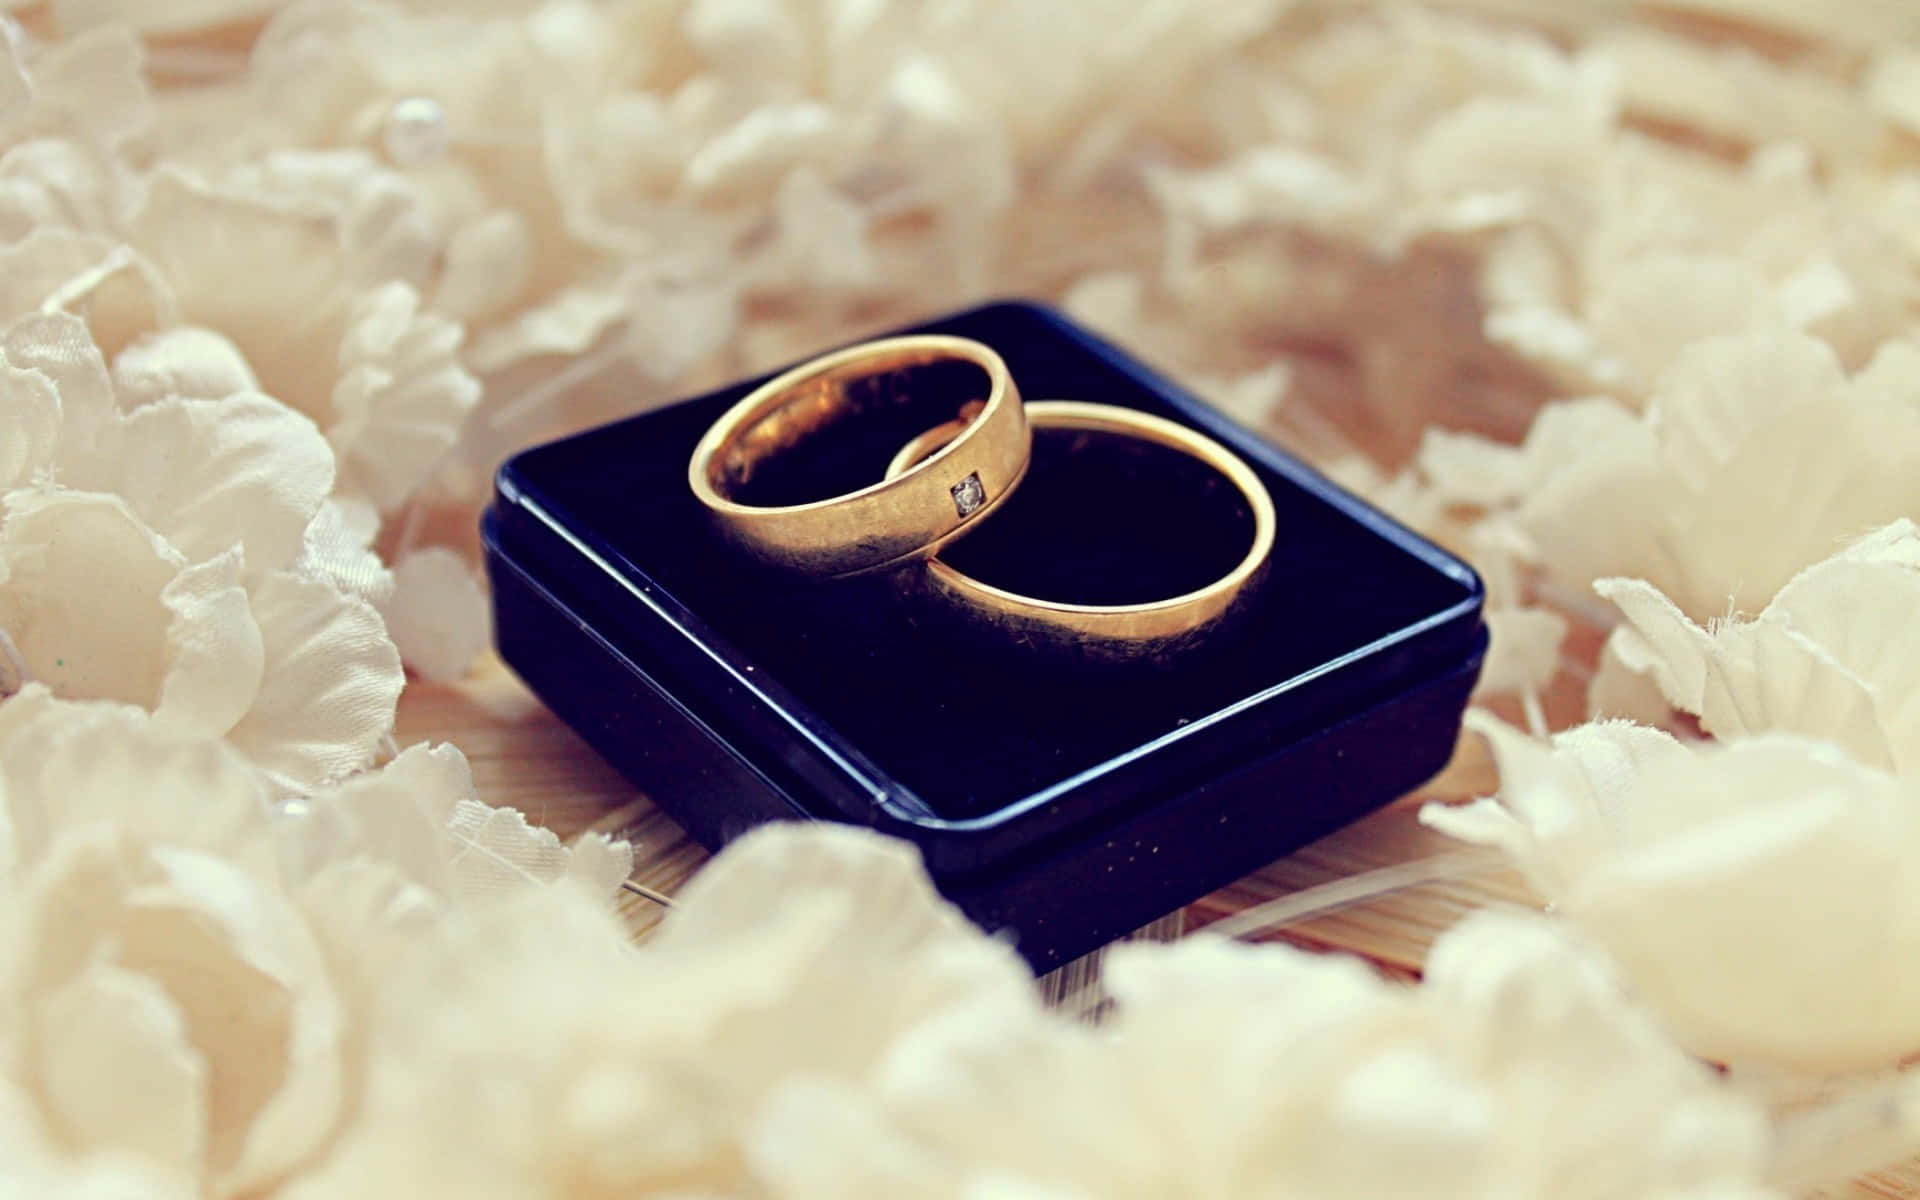 Elegance Unveiled - A pair of beautiful wedding rings